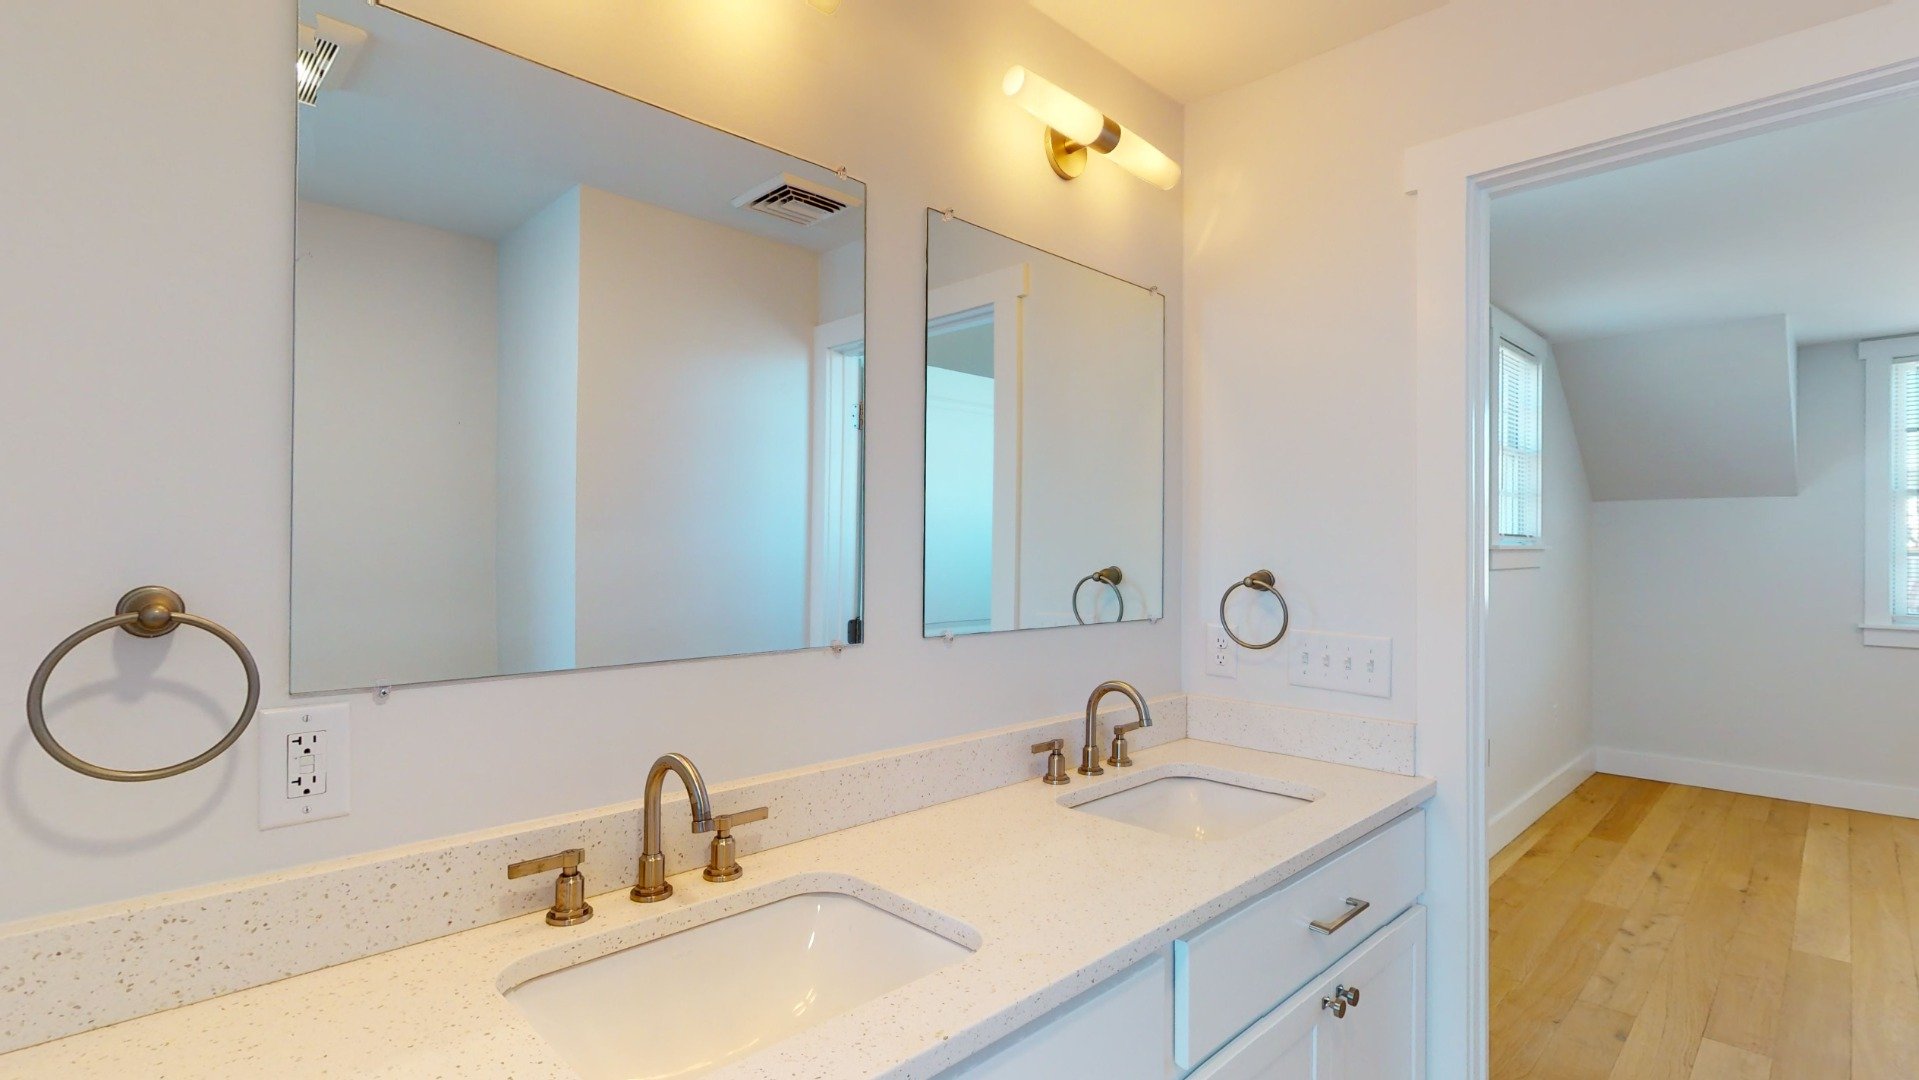 Double vanity in two story modular home.jpeg